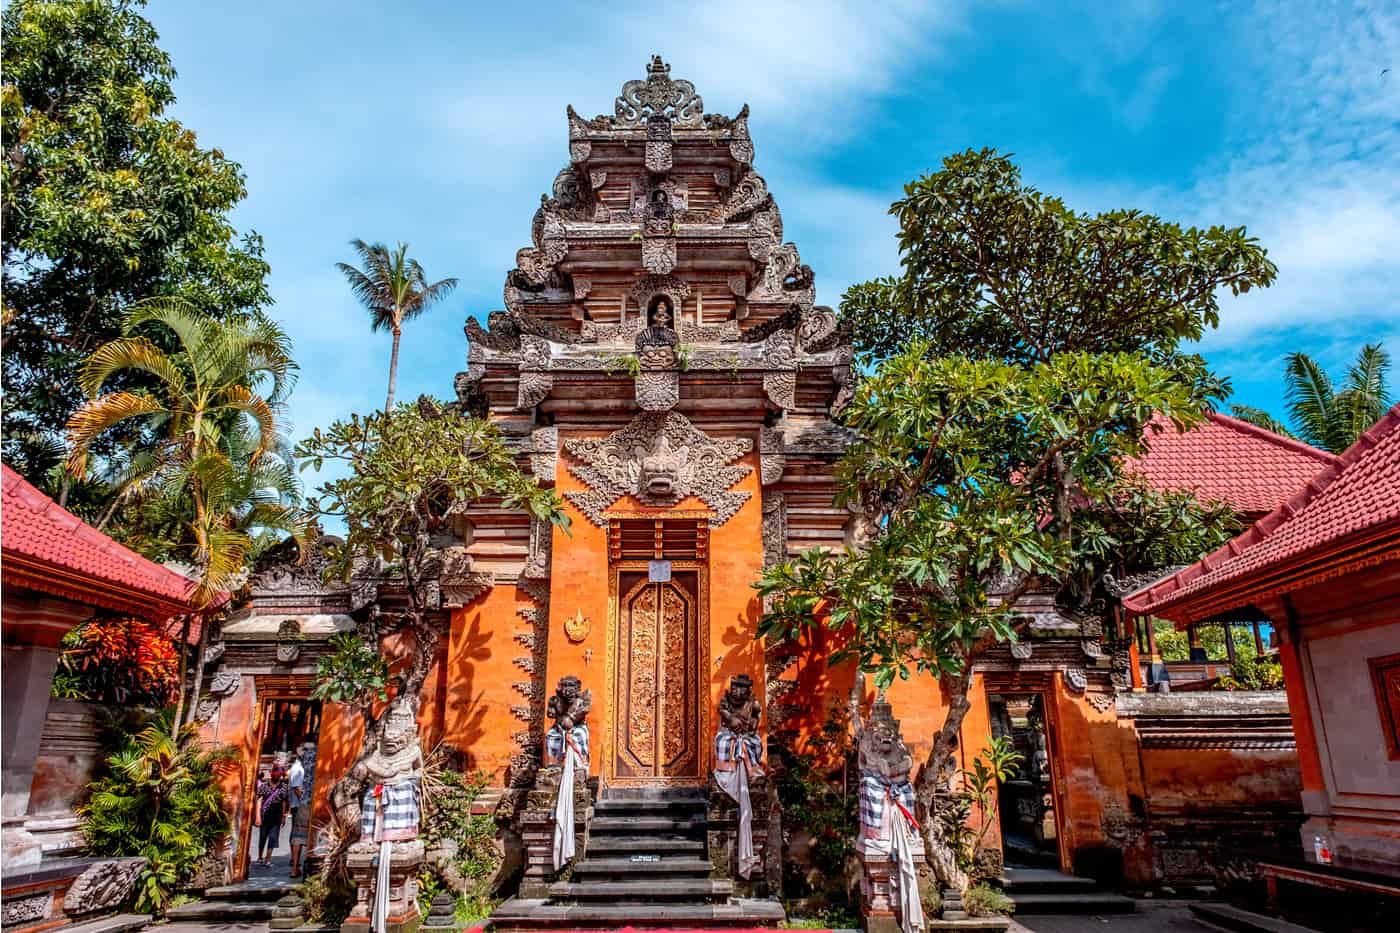 9 Helpful Things to Know About Money in Bali